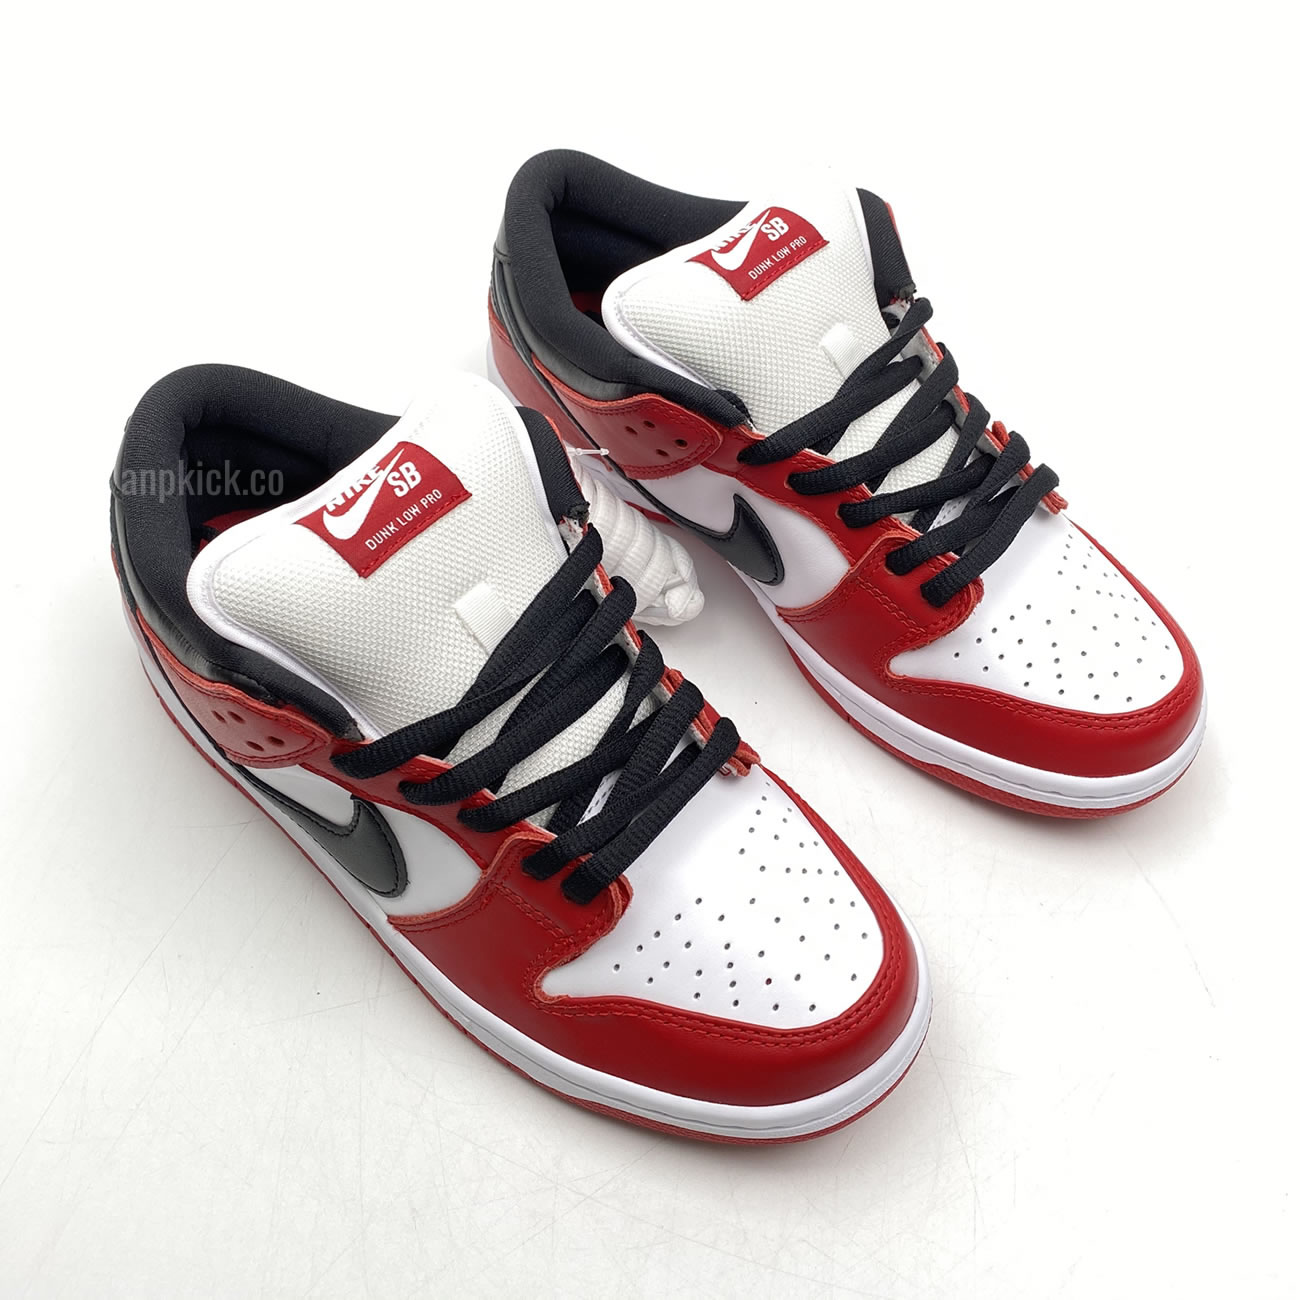 Nike Sb Dunk Low Pro Chicago Varsity Red Release Date Bq6817 600 (2) - newkick.org